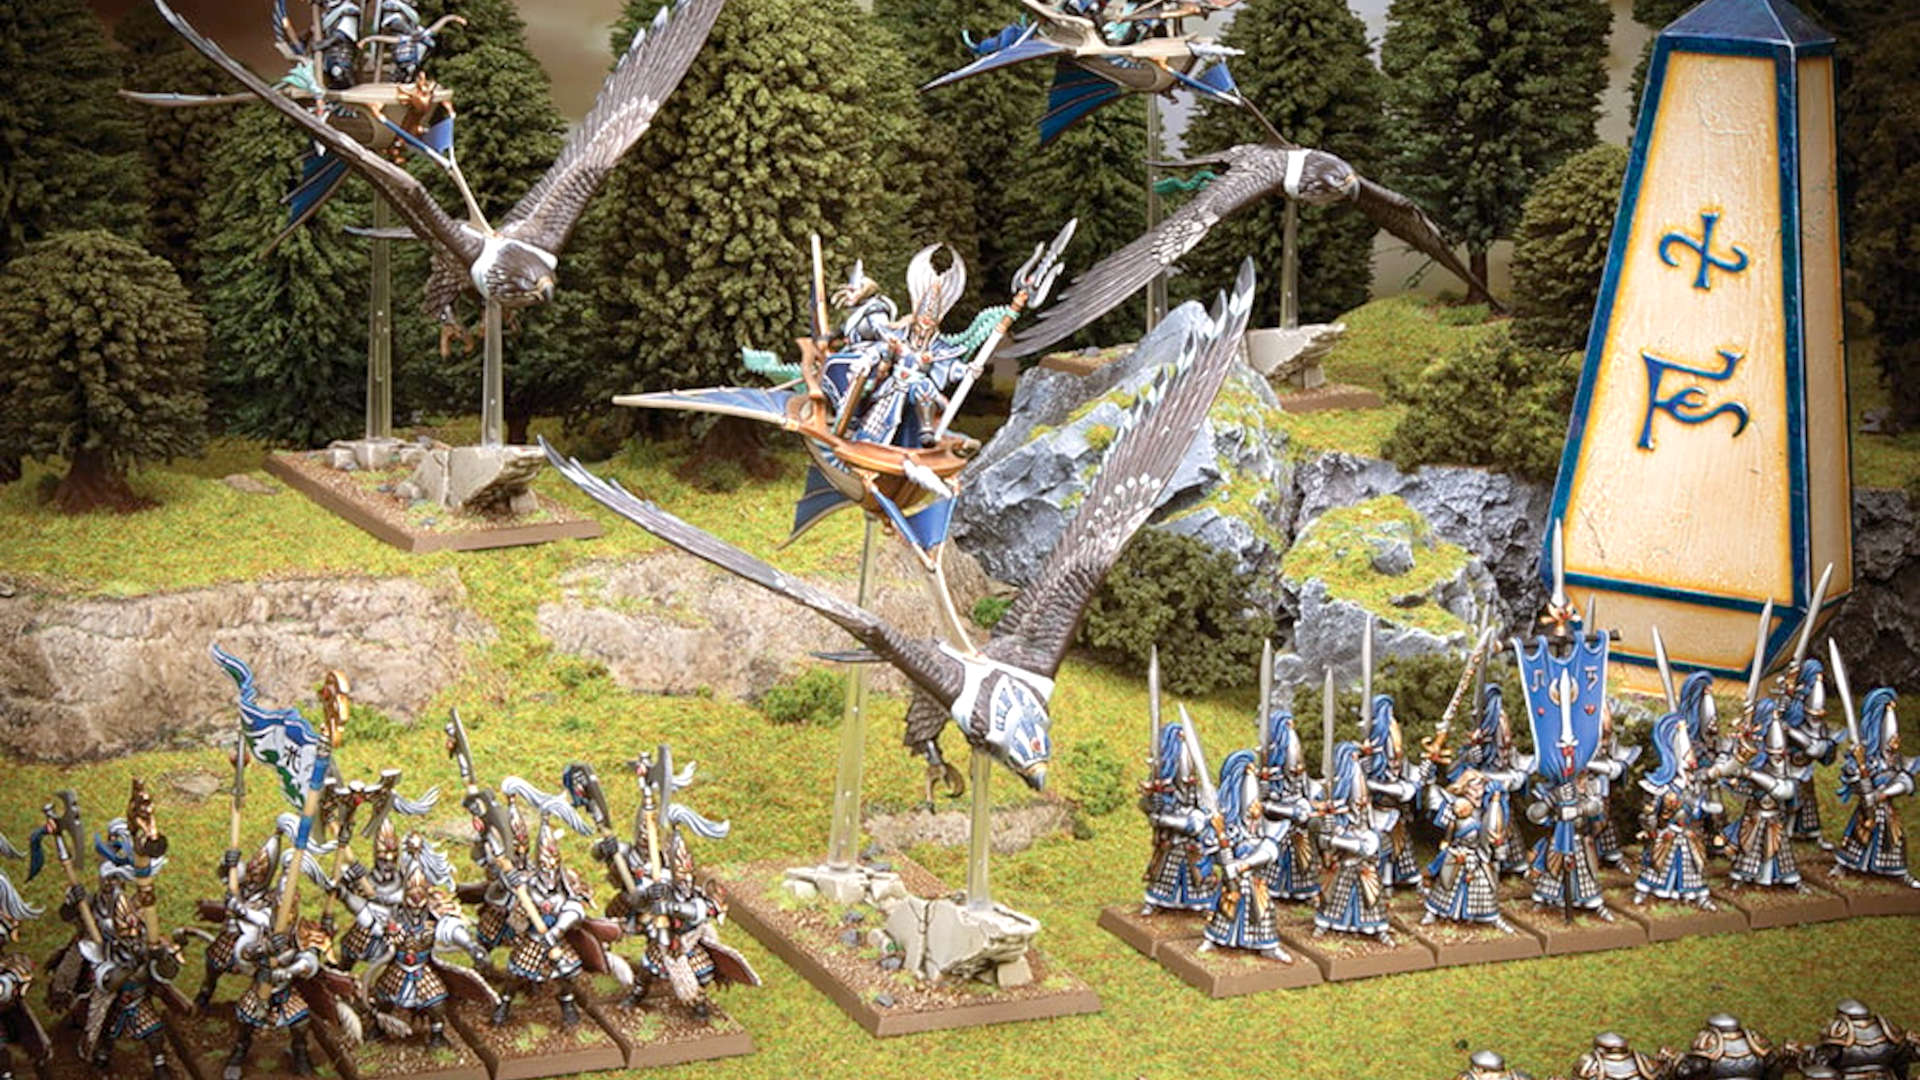 Because Of Dragons: Should Warhammer: The Old World Go Back Even Further?